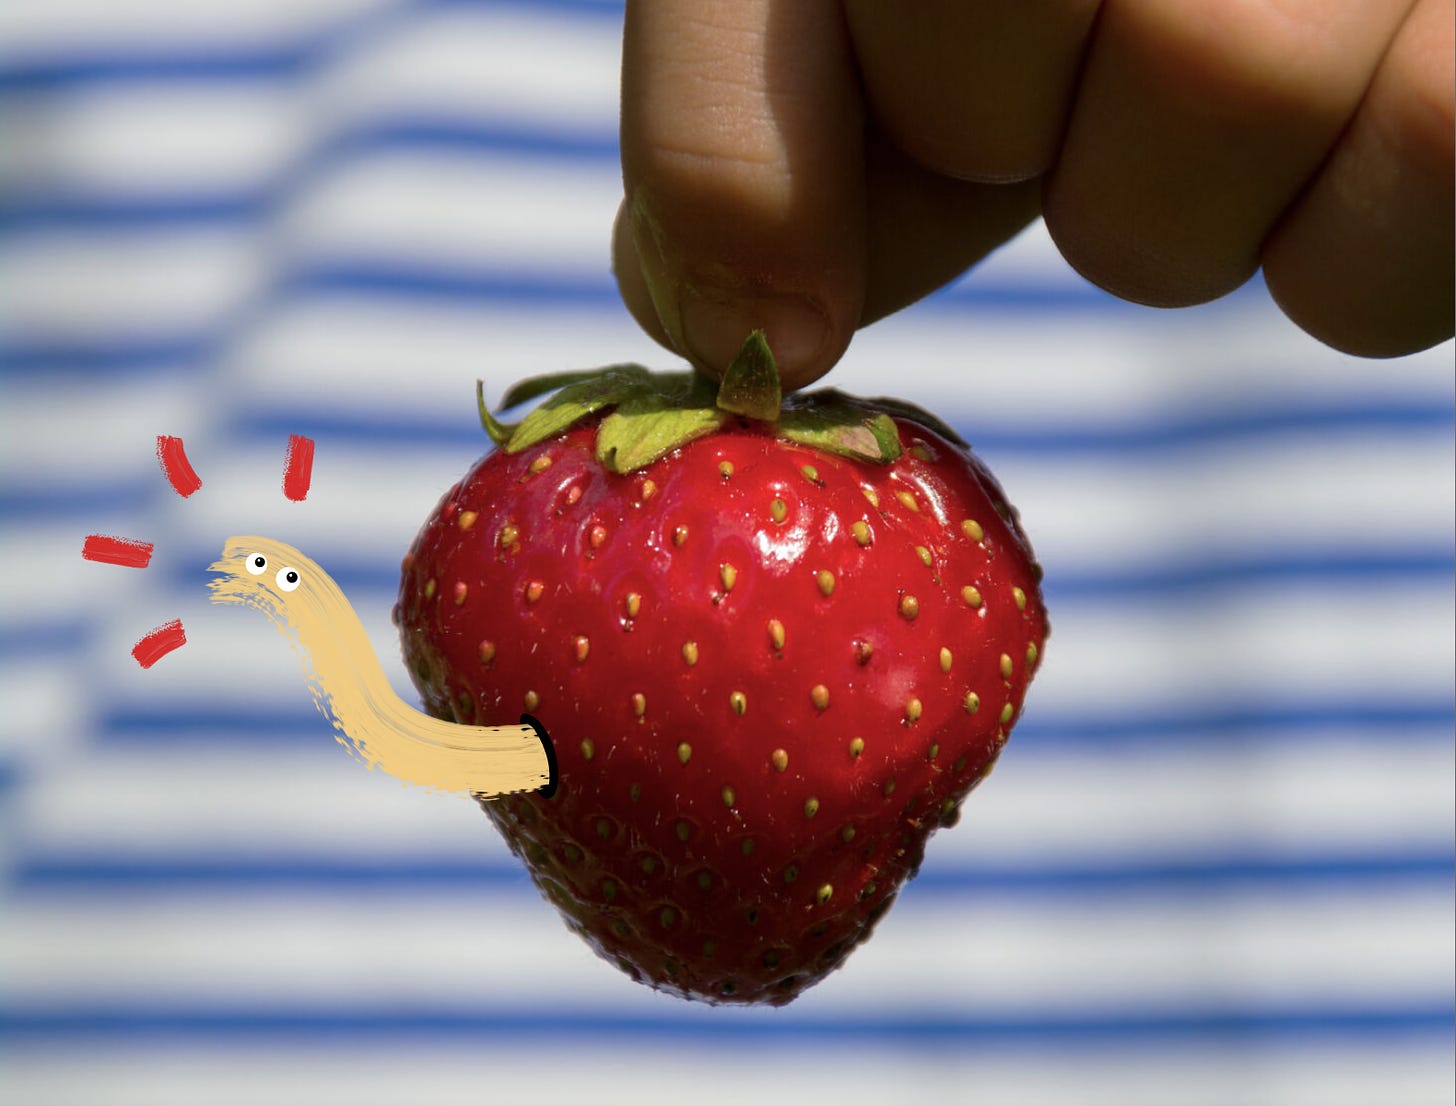 Fingers holding a large, red strawberry in front of a blue and white striped background. A hand drawn worm is emerging from a hand drawn hole on the left hand side of the fruit.